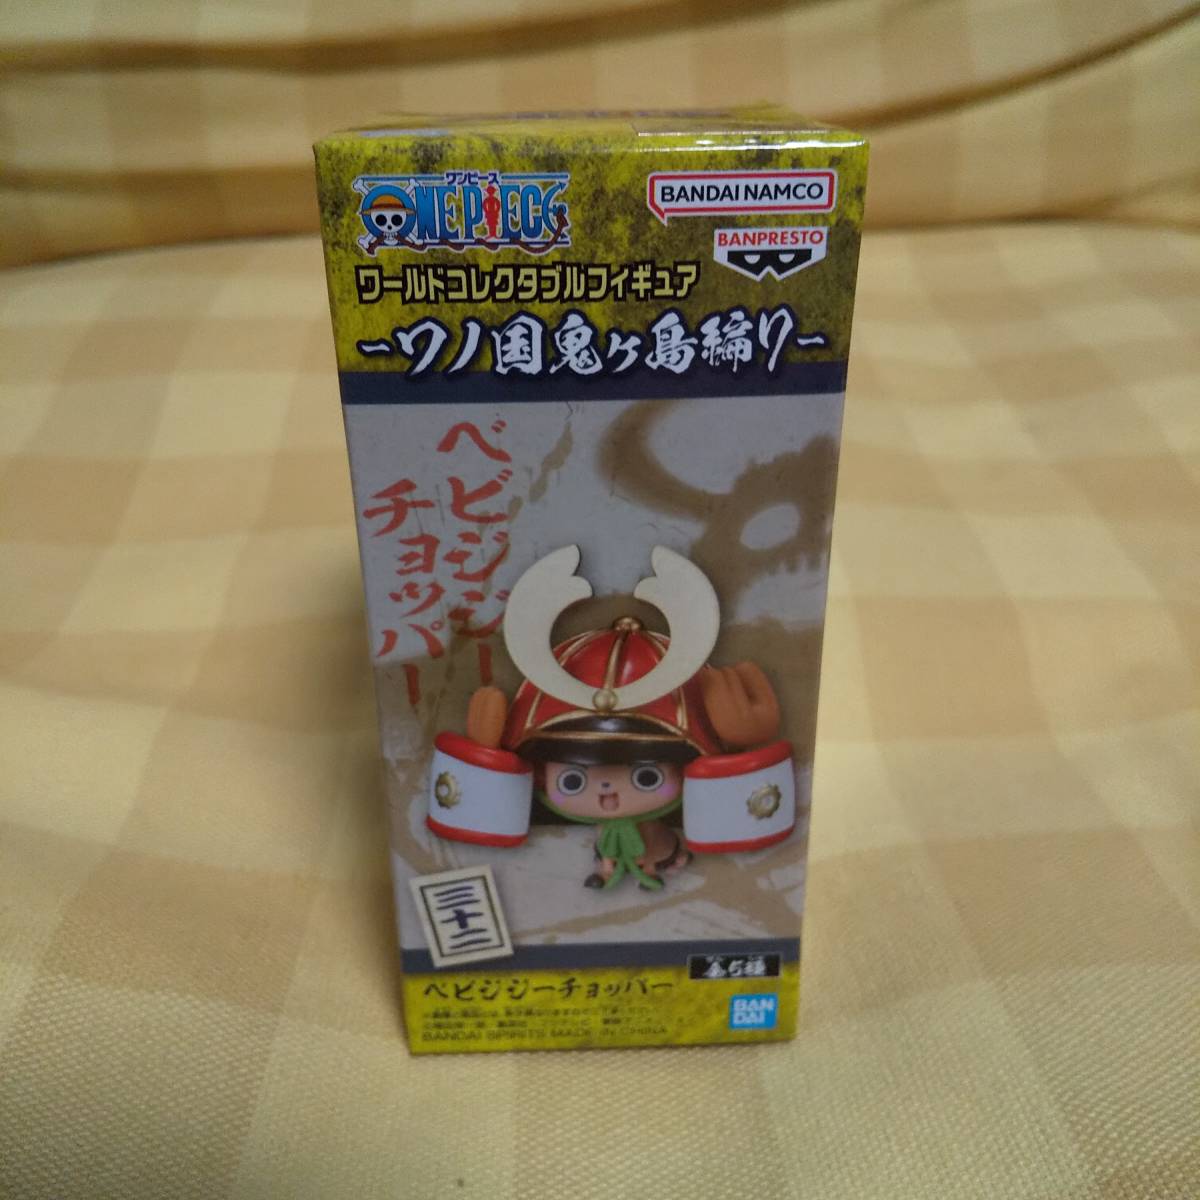  new goods unopened One-piece world collectable figure wano country . pieces island compilation 7bebijiji- chopper wa-kore postage 220 jpy ~